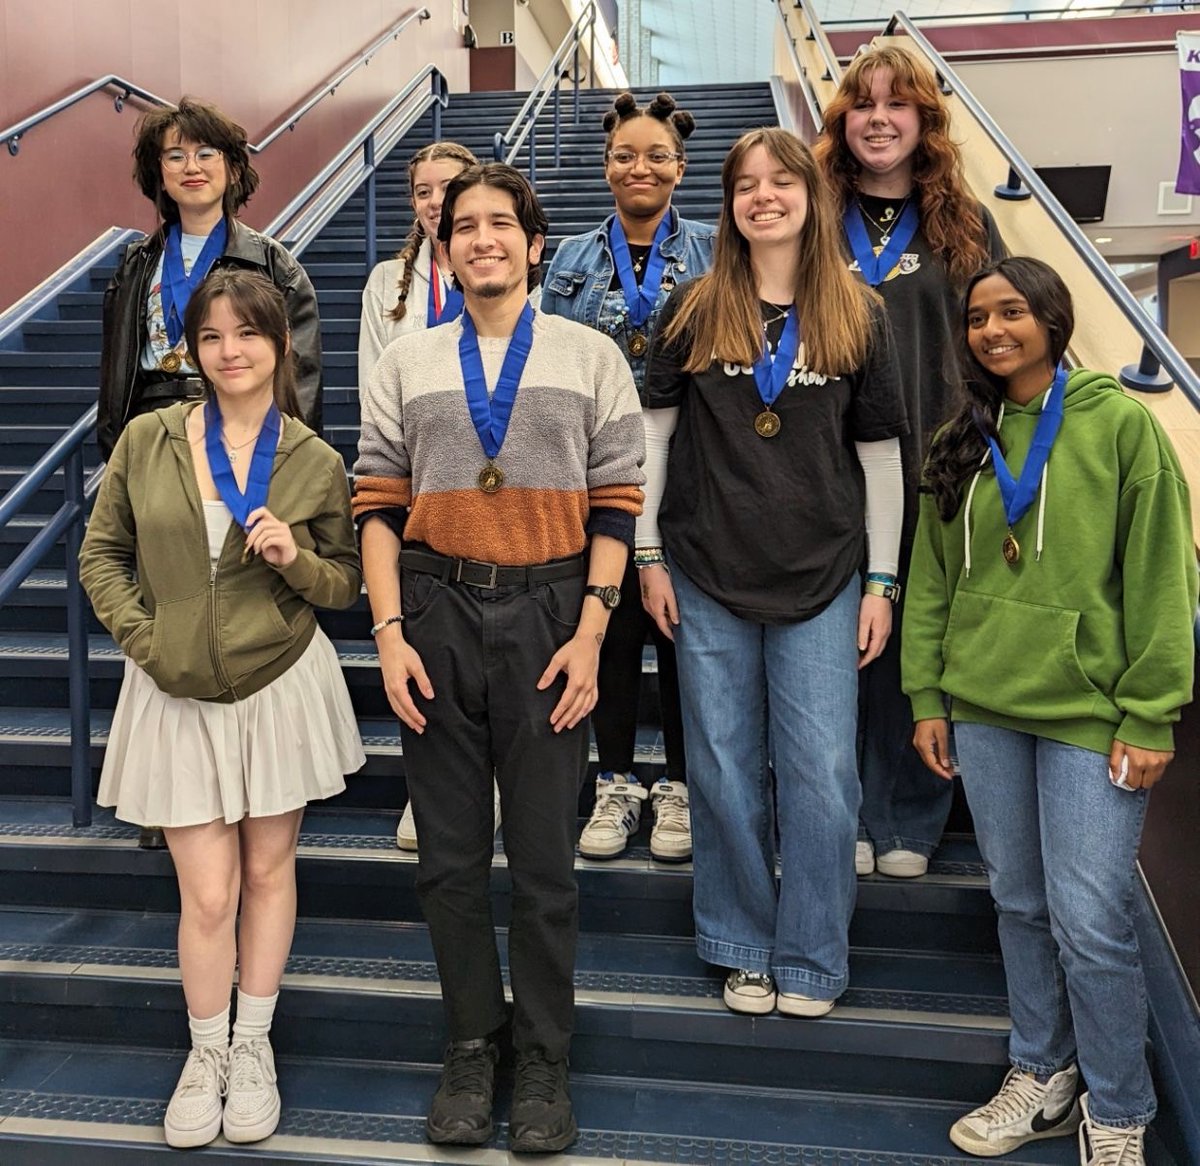 The Art Department at HHS had great success at the Regional VASE contest. Hendrickson also had 4 students who qualified for State VASE on Saturday. The students are Carlos Rodriguez, Sarah Curran, Samantha Morales, and Sofya Zharikova. Nice Work! @pfisd @PfISDfinearts